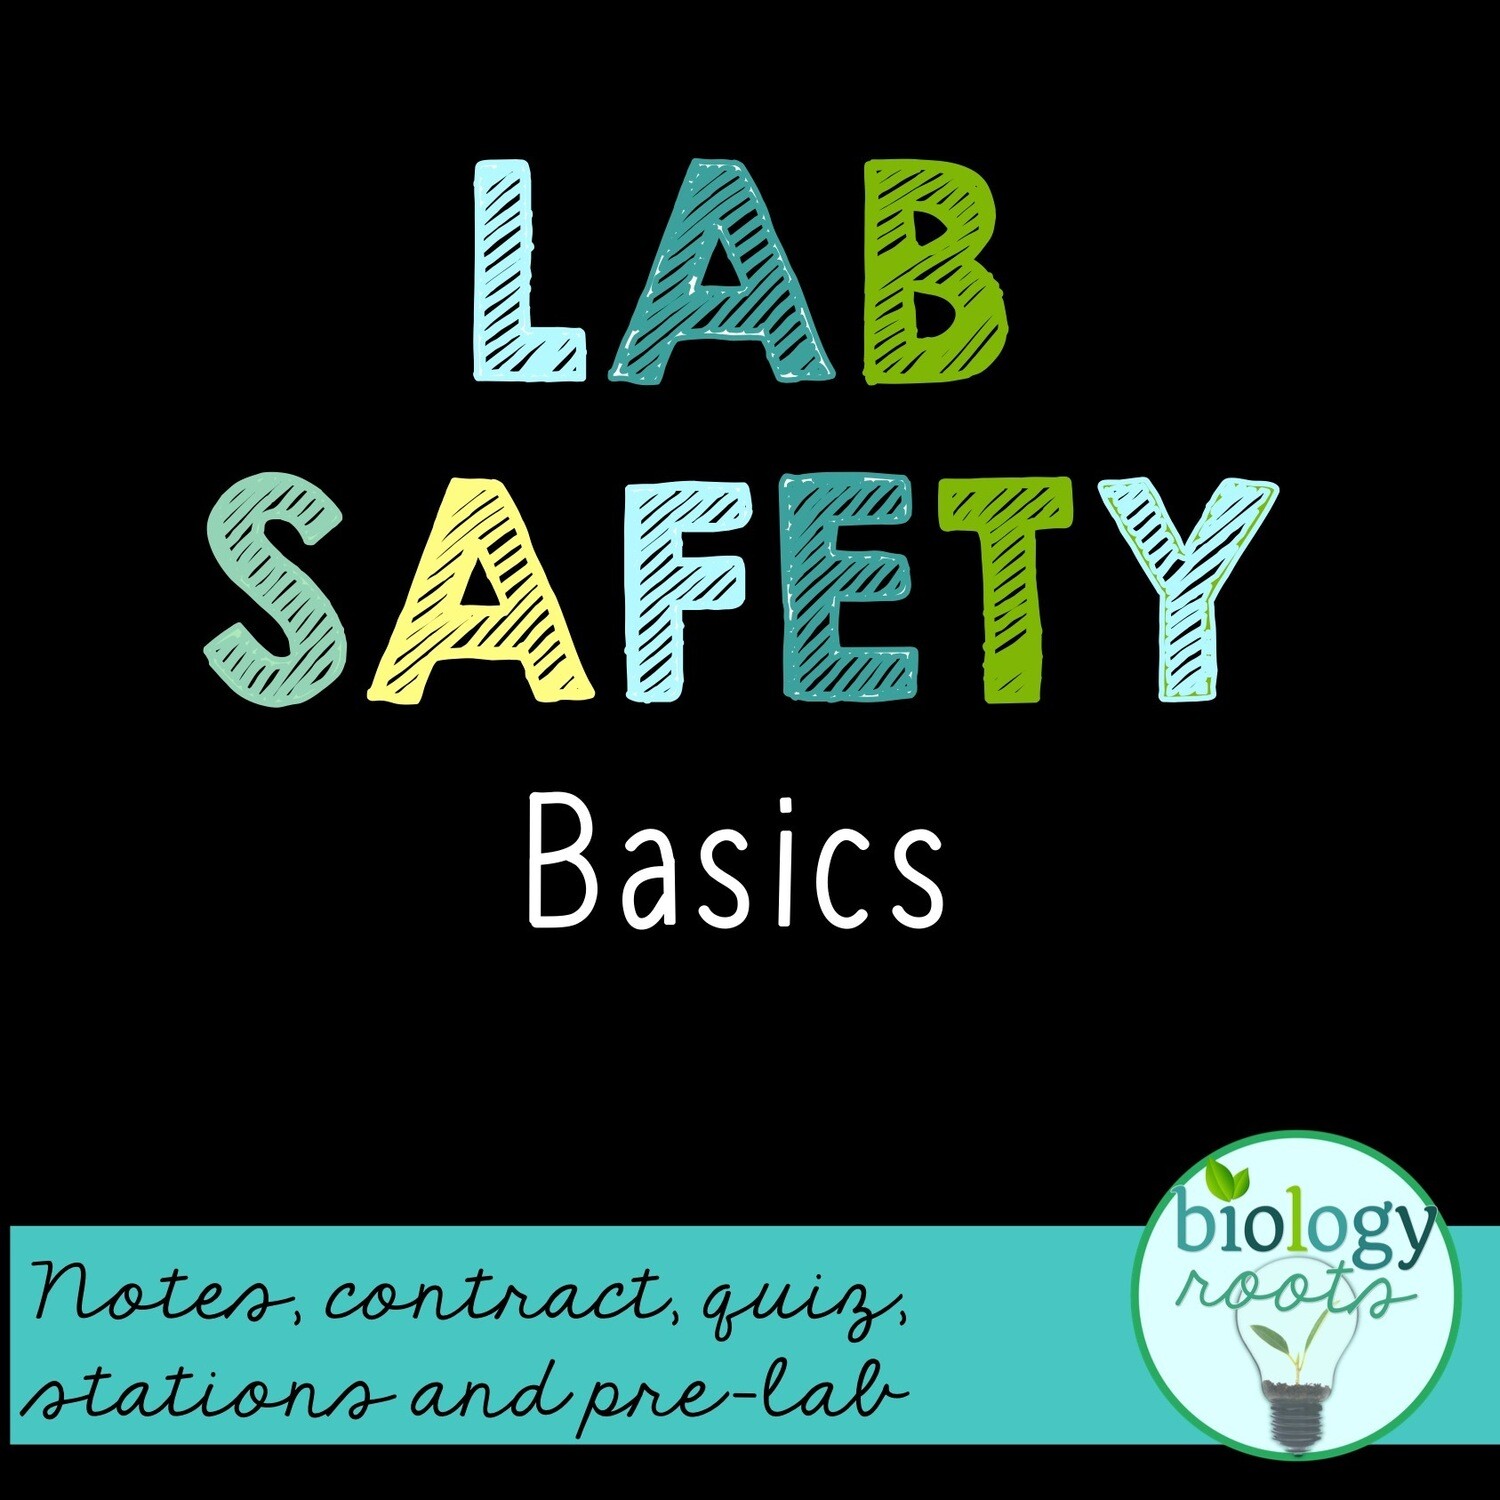 science safety rules powerpoint